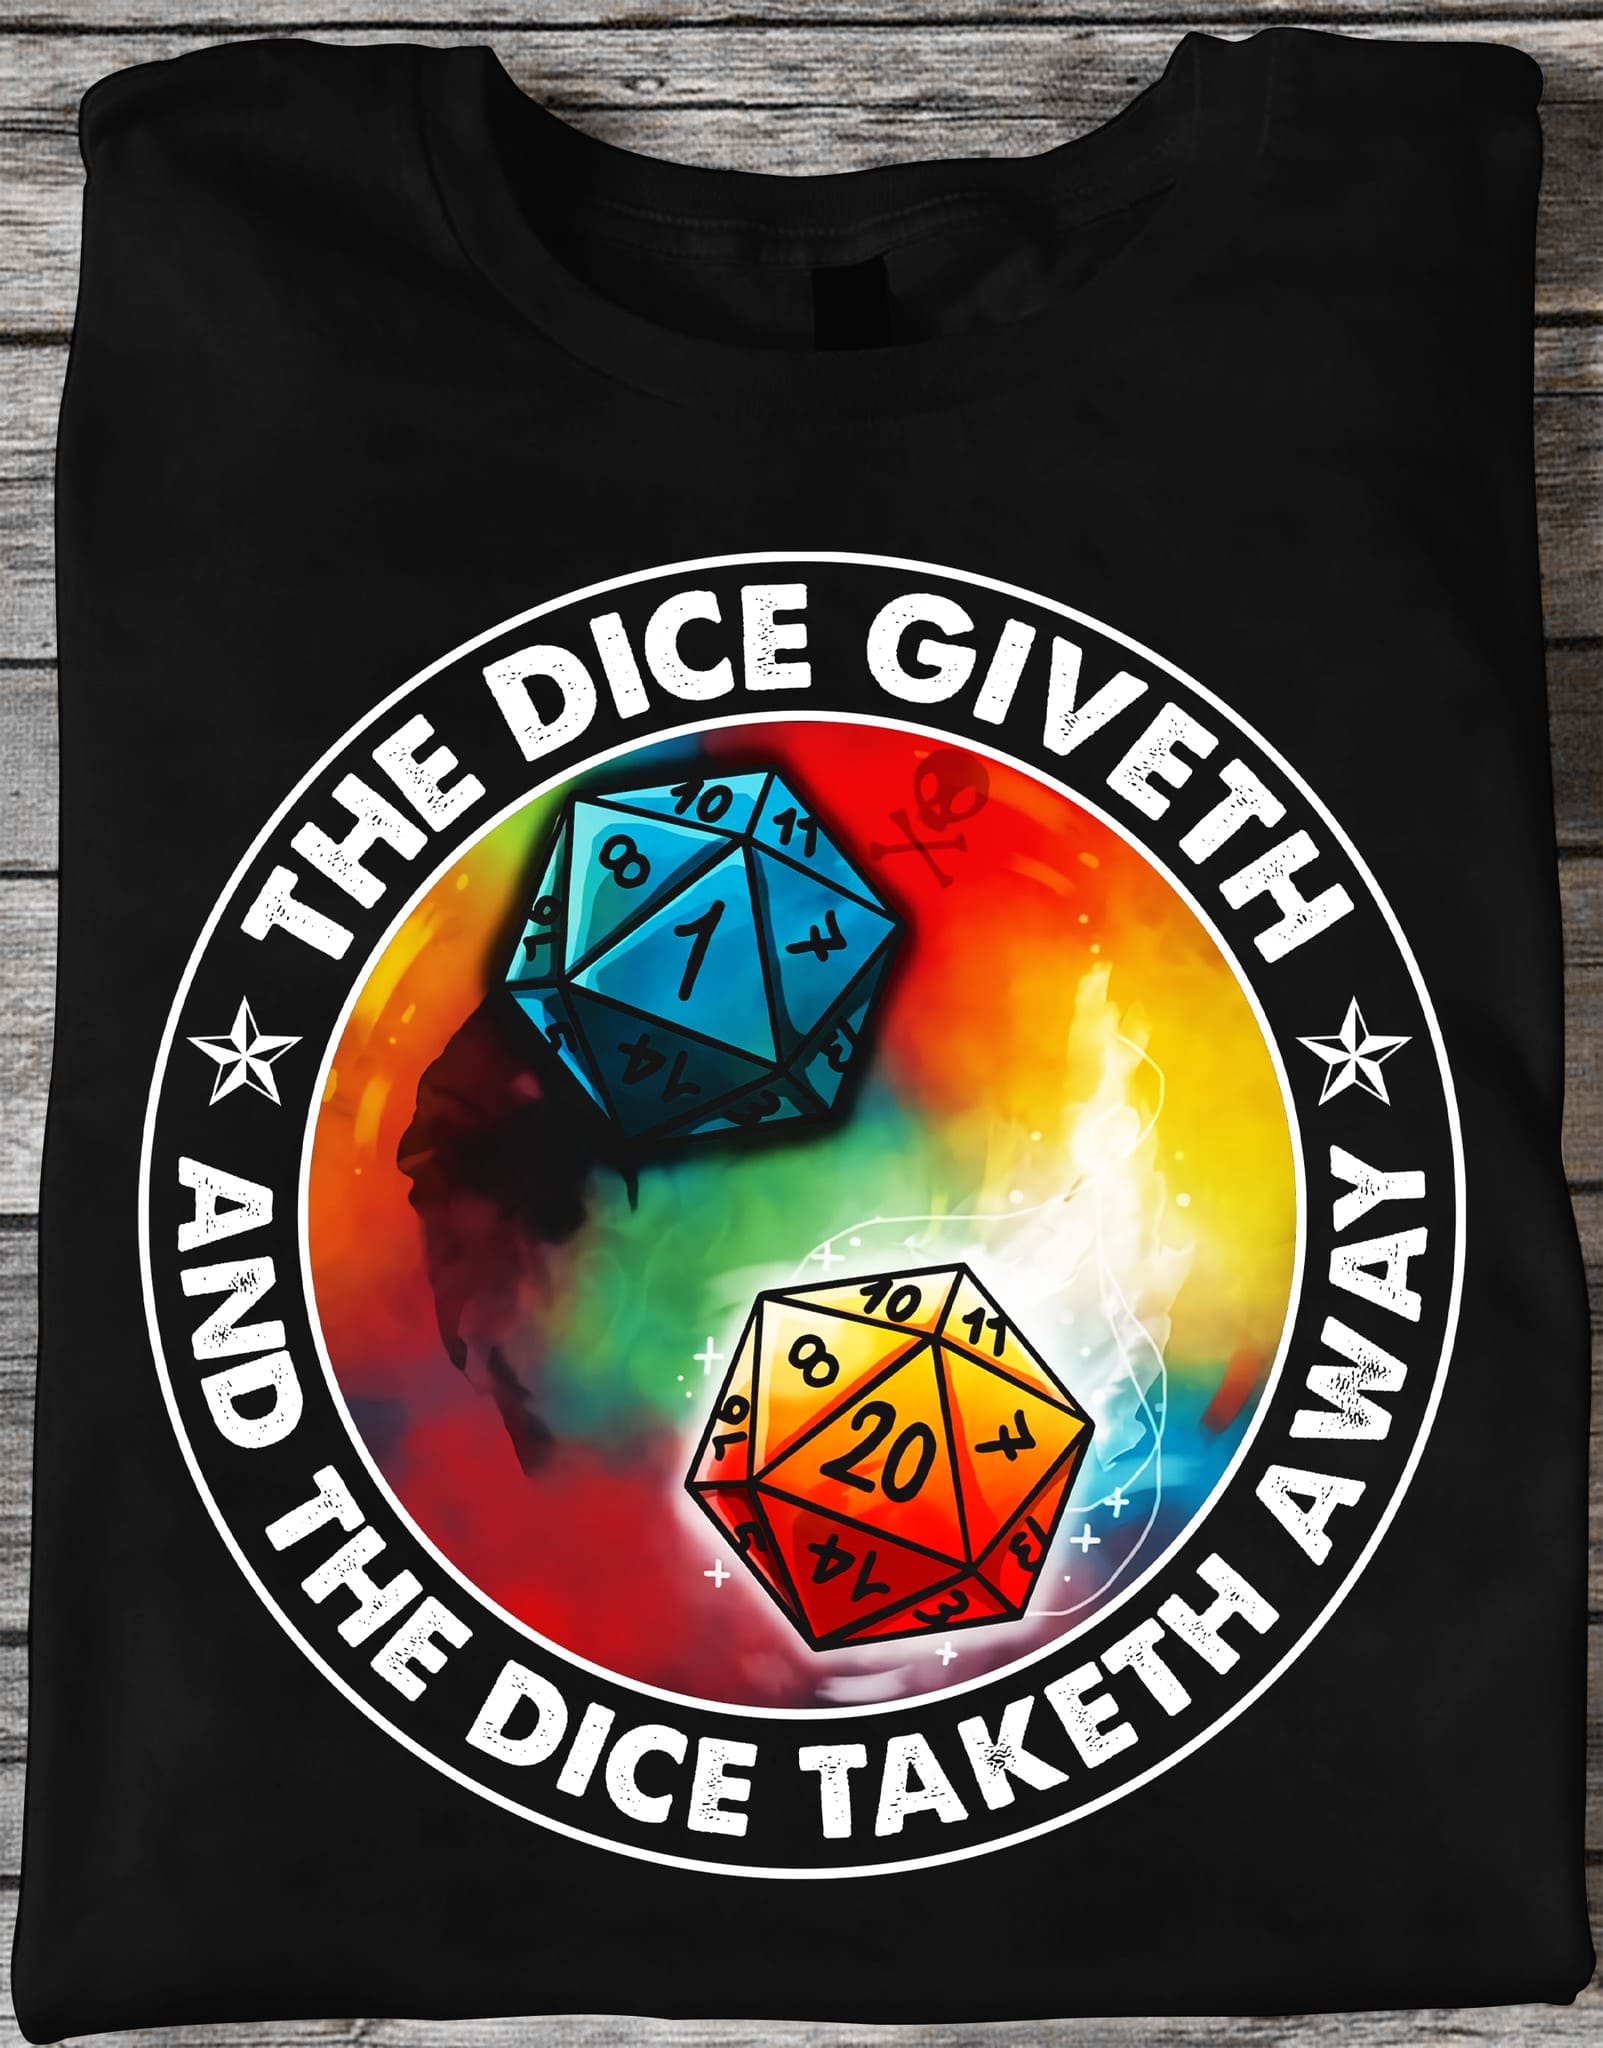 The dice giveth and the dice taketh away - Dungeons and Dragon, colorful dices